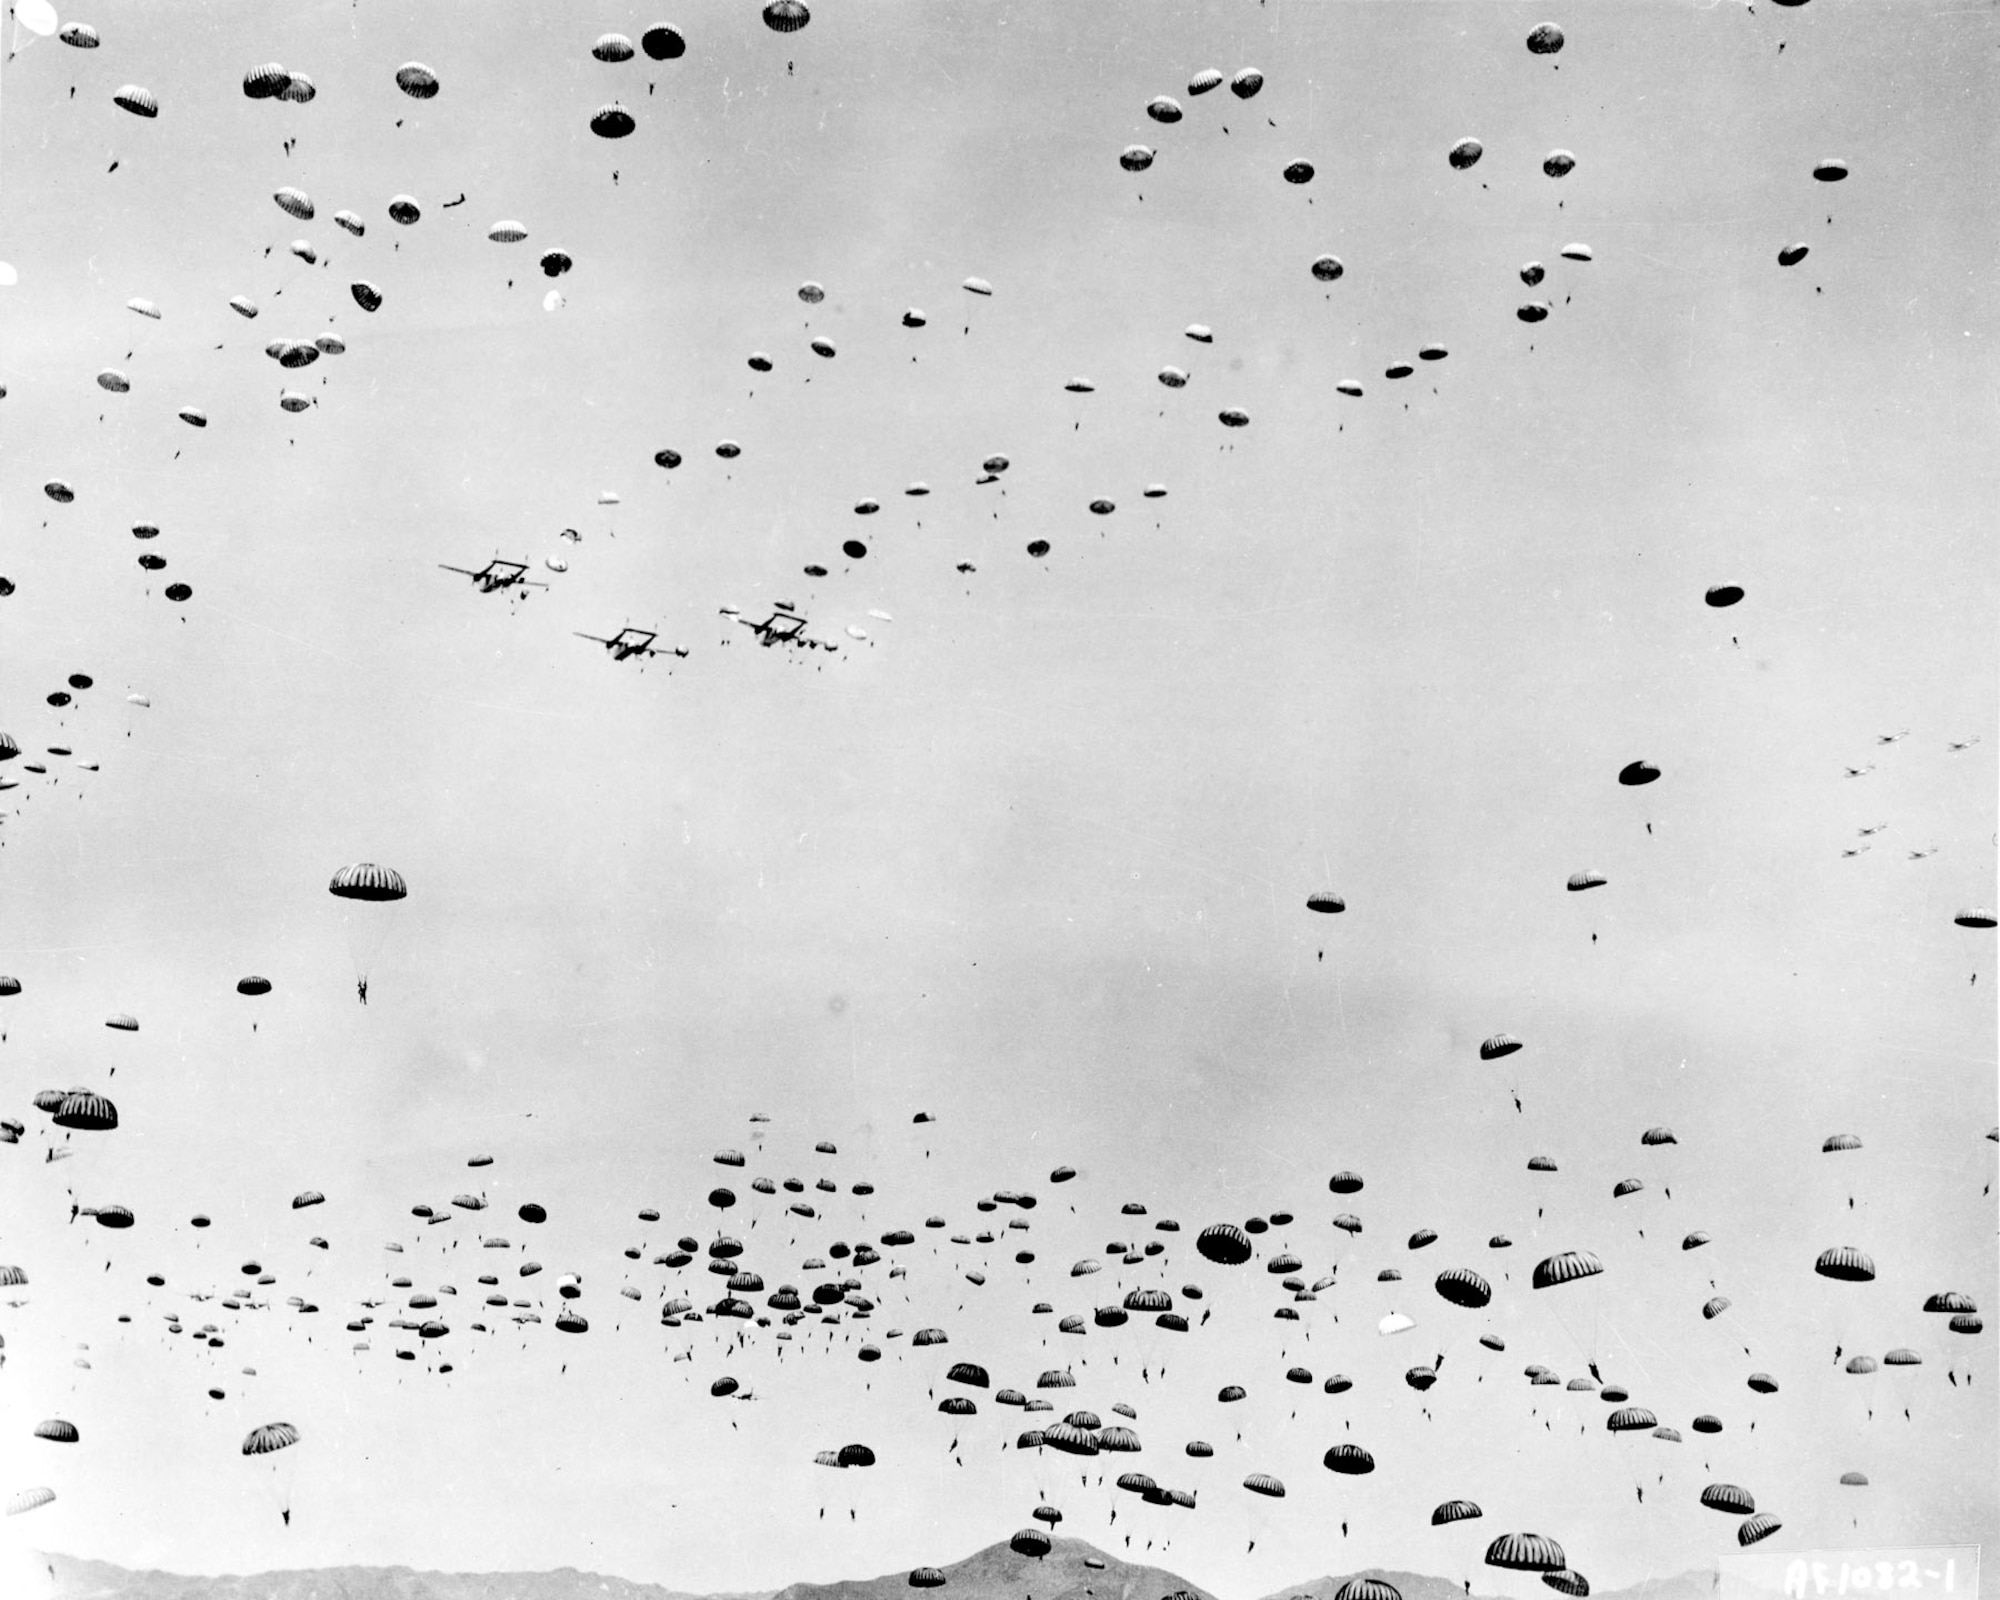 C-119s drop soldiers of the 187th Regimental Combat Team and will later supply them with food, vehicles, artillery and ammunition. (U.S. Air Force photo)